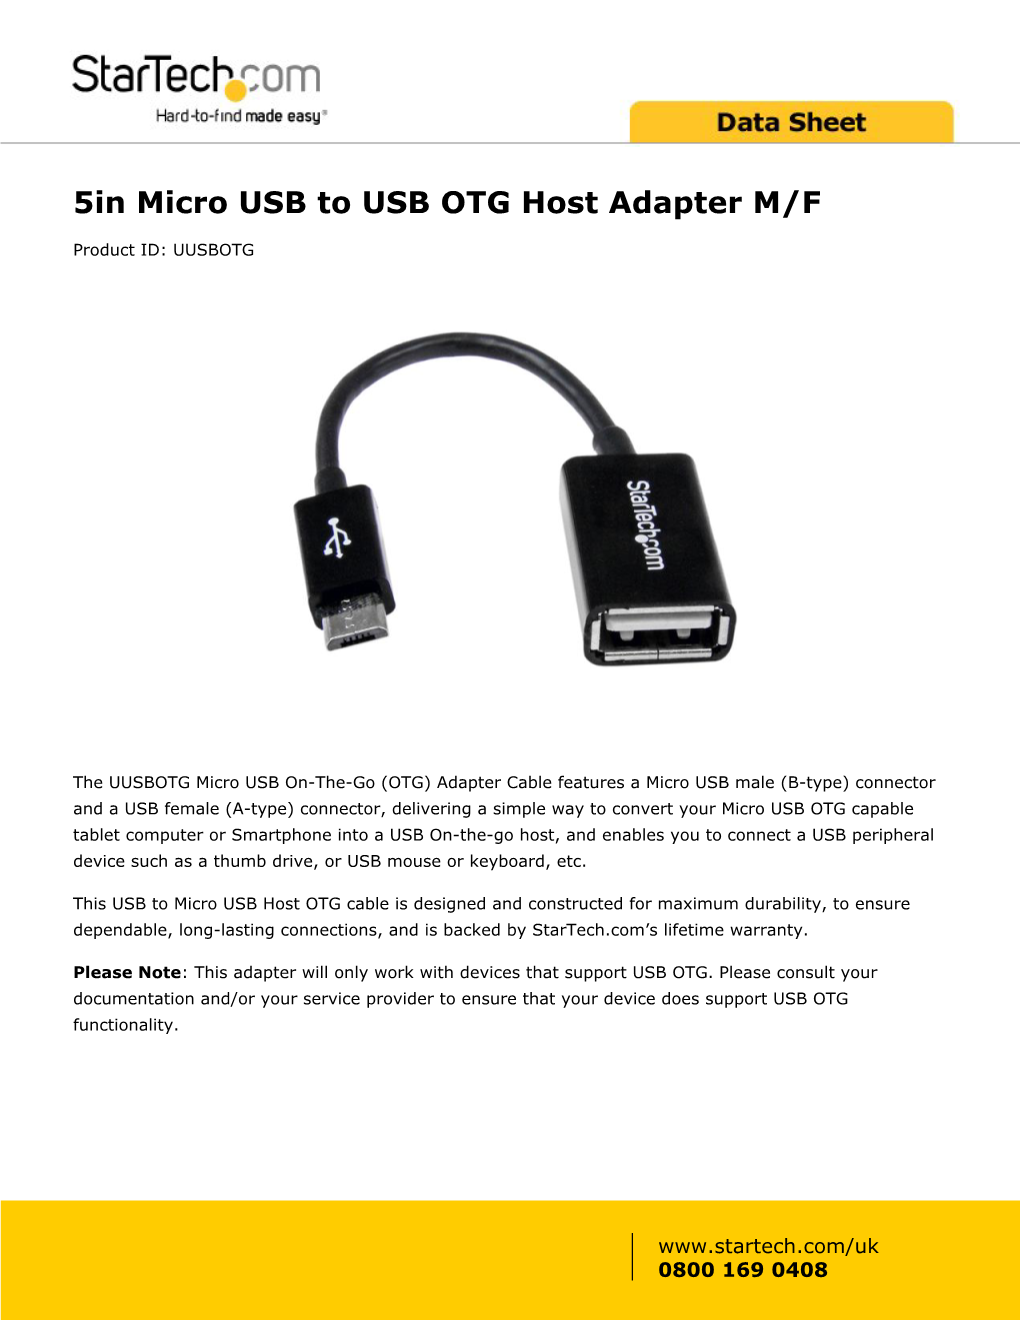 5In Micro USB to USB OTG Host Adapter M/F